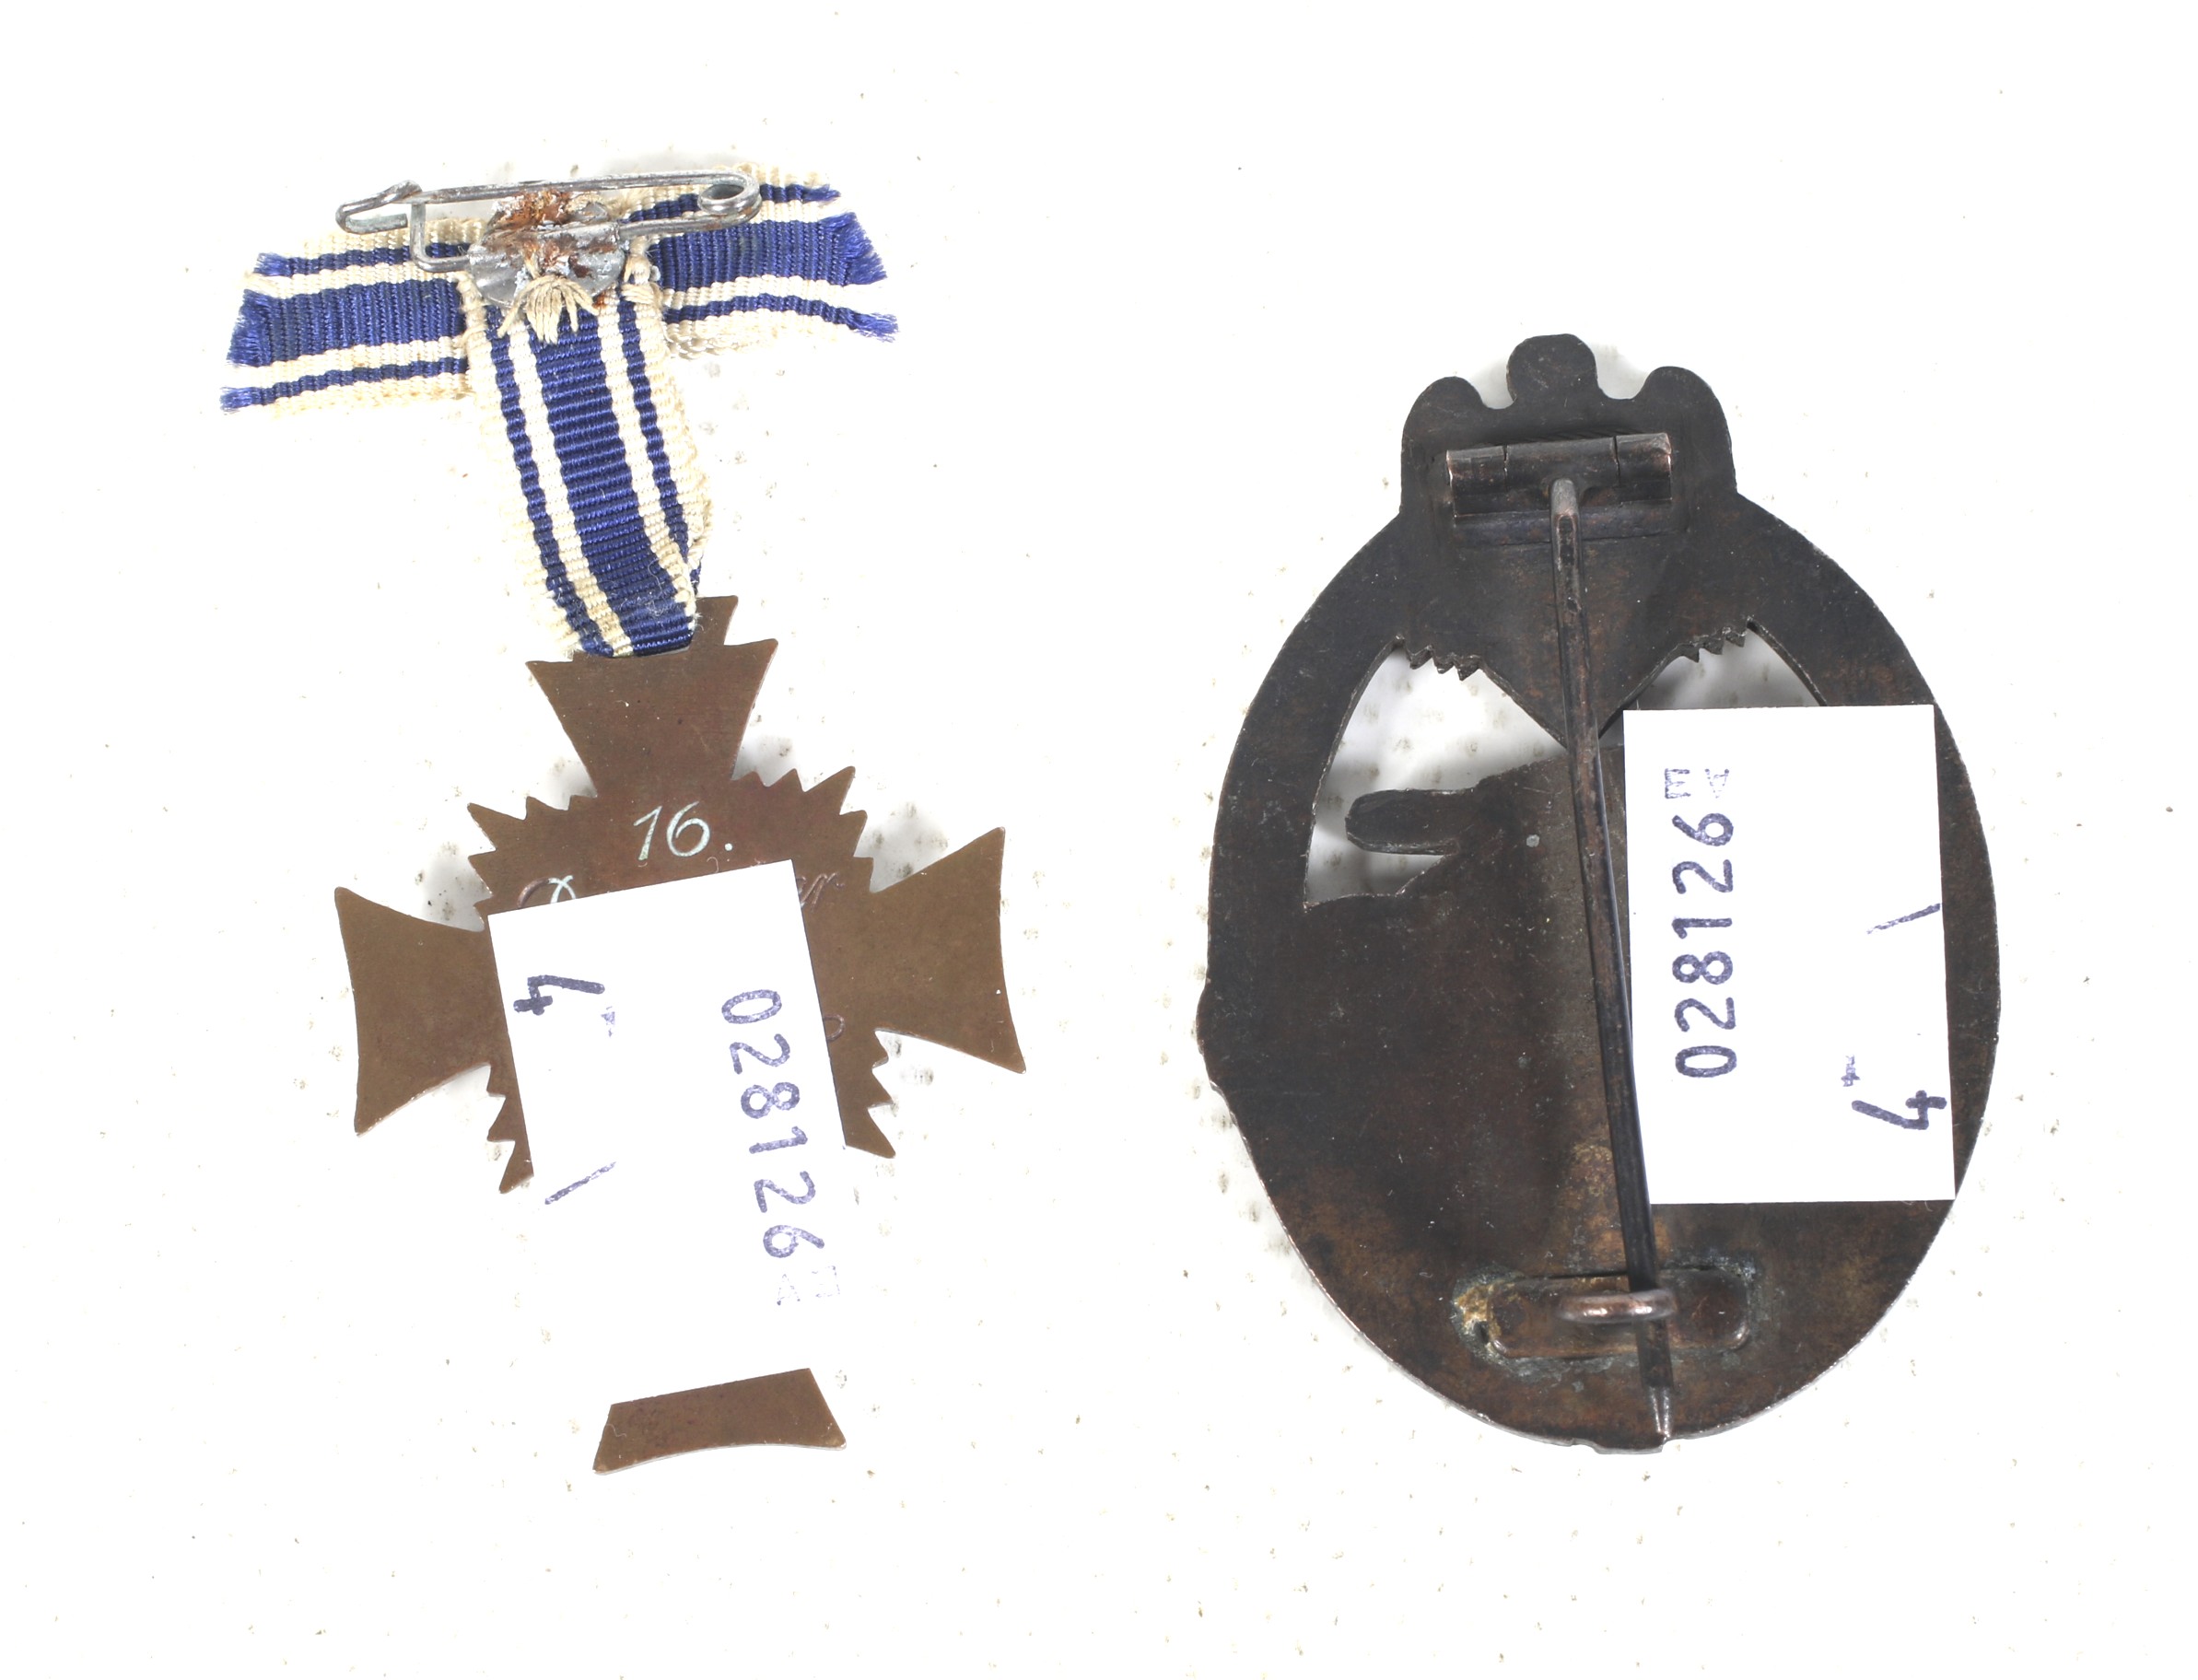 A WWII German military bronze tank badge, and an enamel Mother's Cross medal. - Image 2 of 2